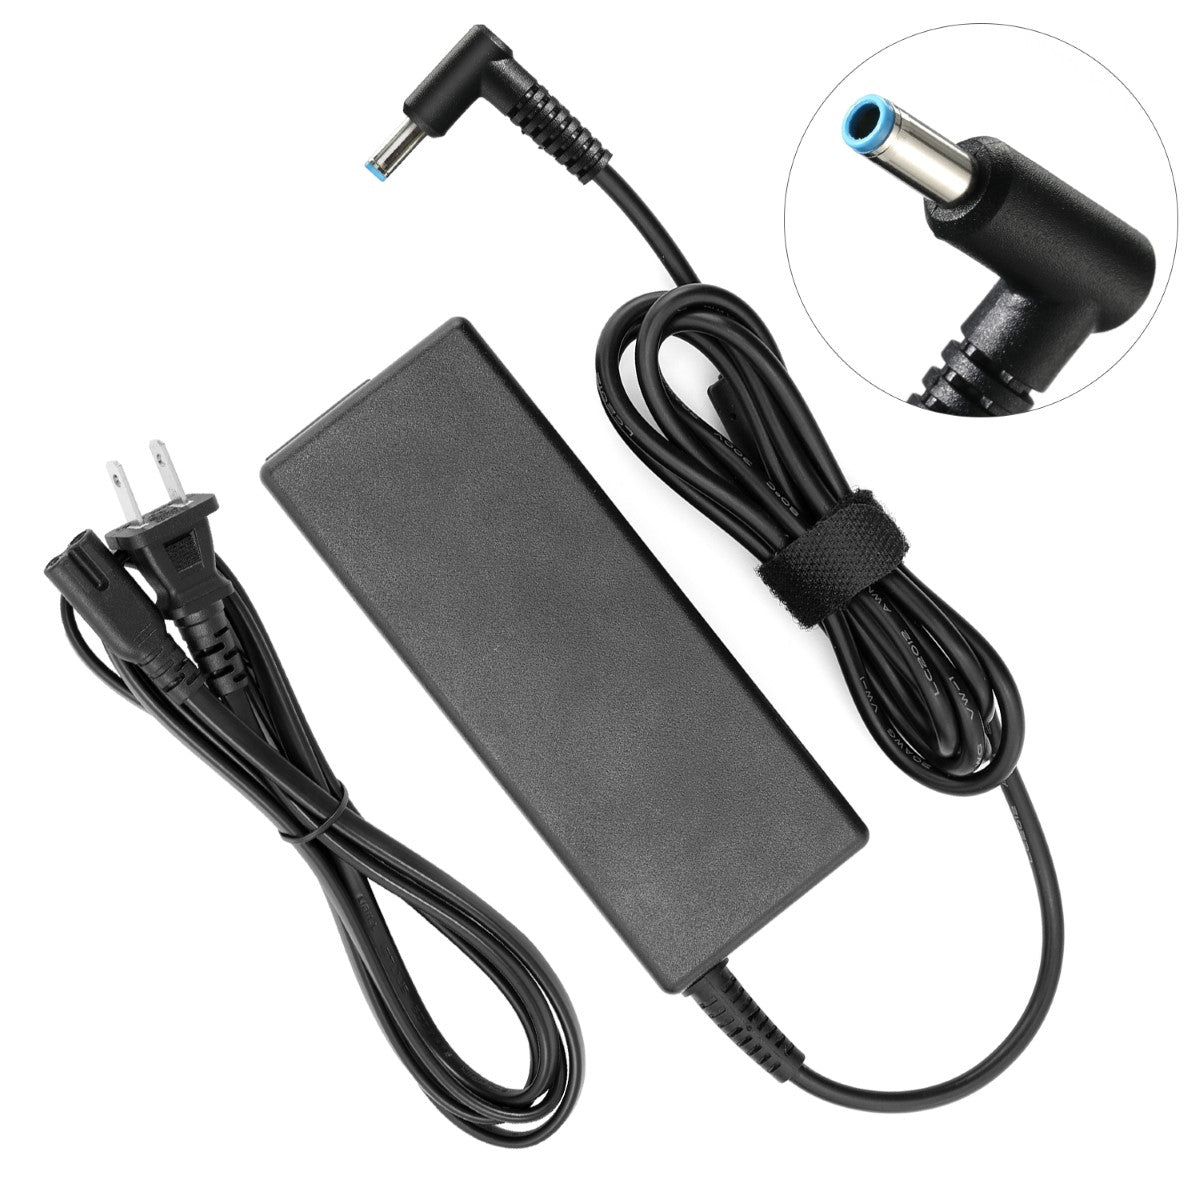 AC Adapter Charger for HP Envy TouchSmart 15-j020us Notebook.